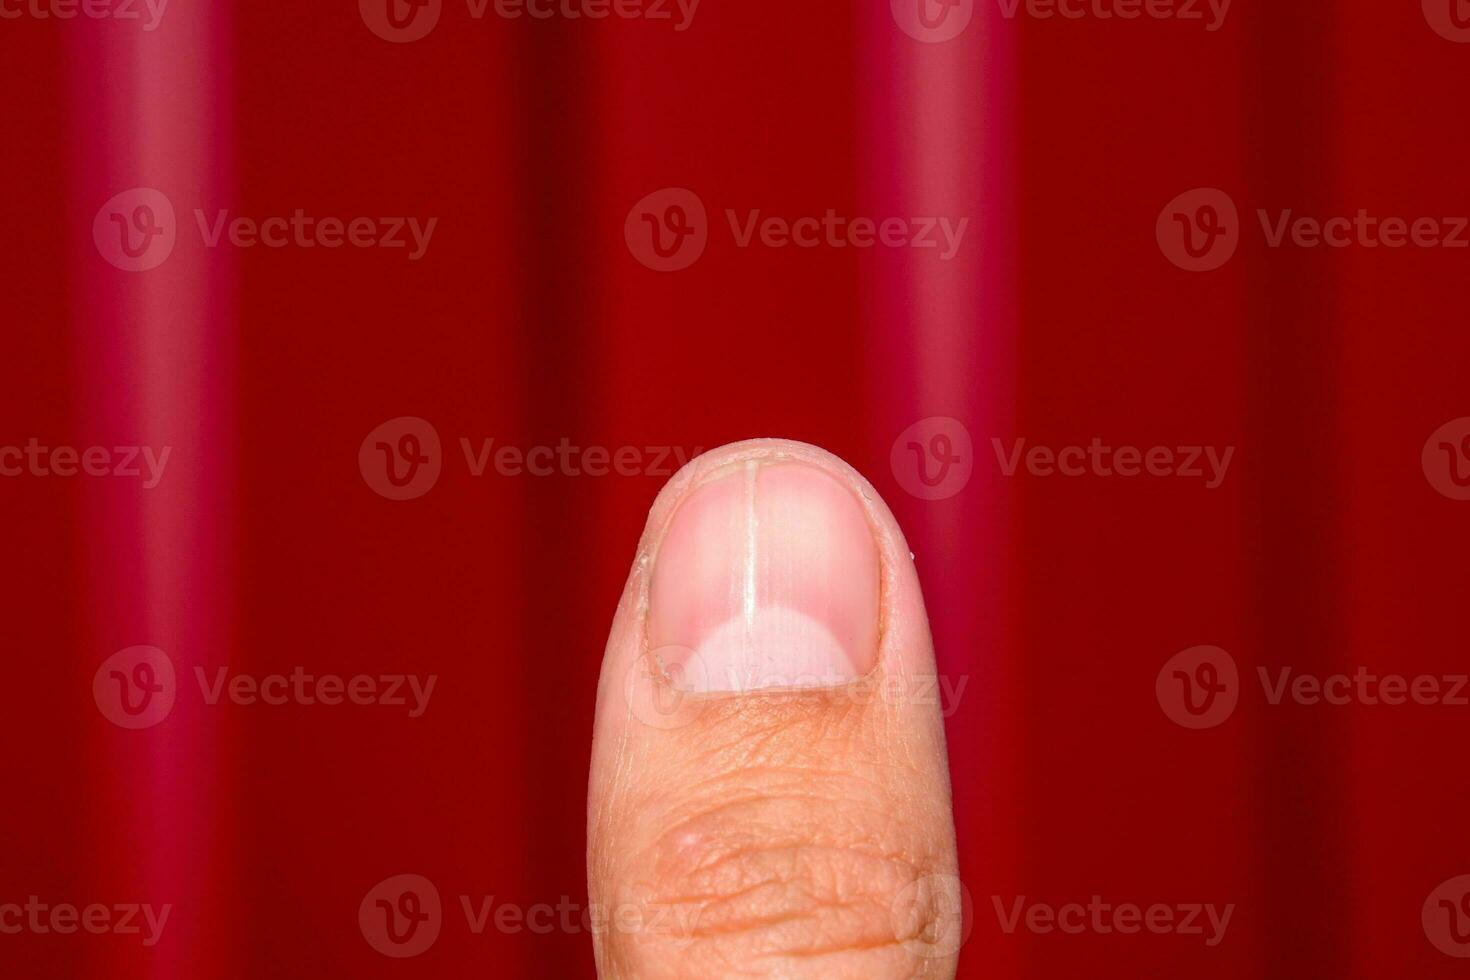 Forked nail on the thumb. Dilation of the nail, traumatic pathology. The nail is divided in half photo